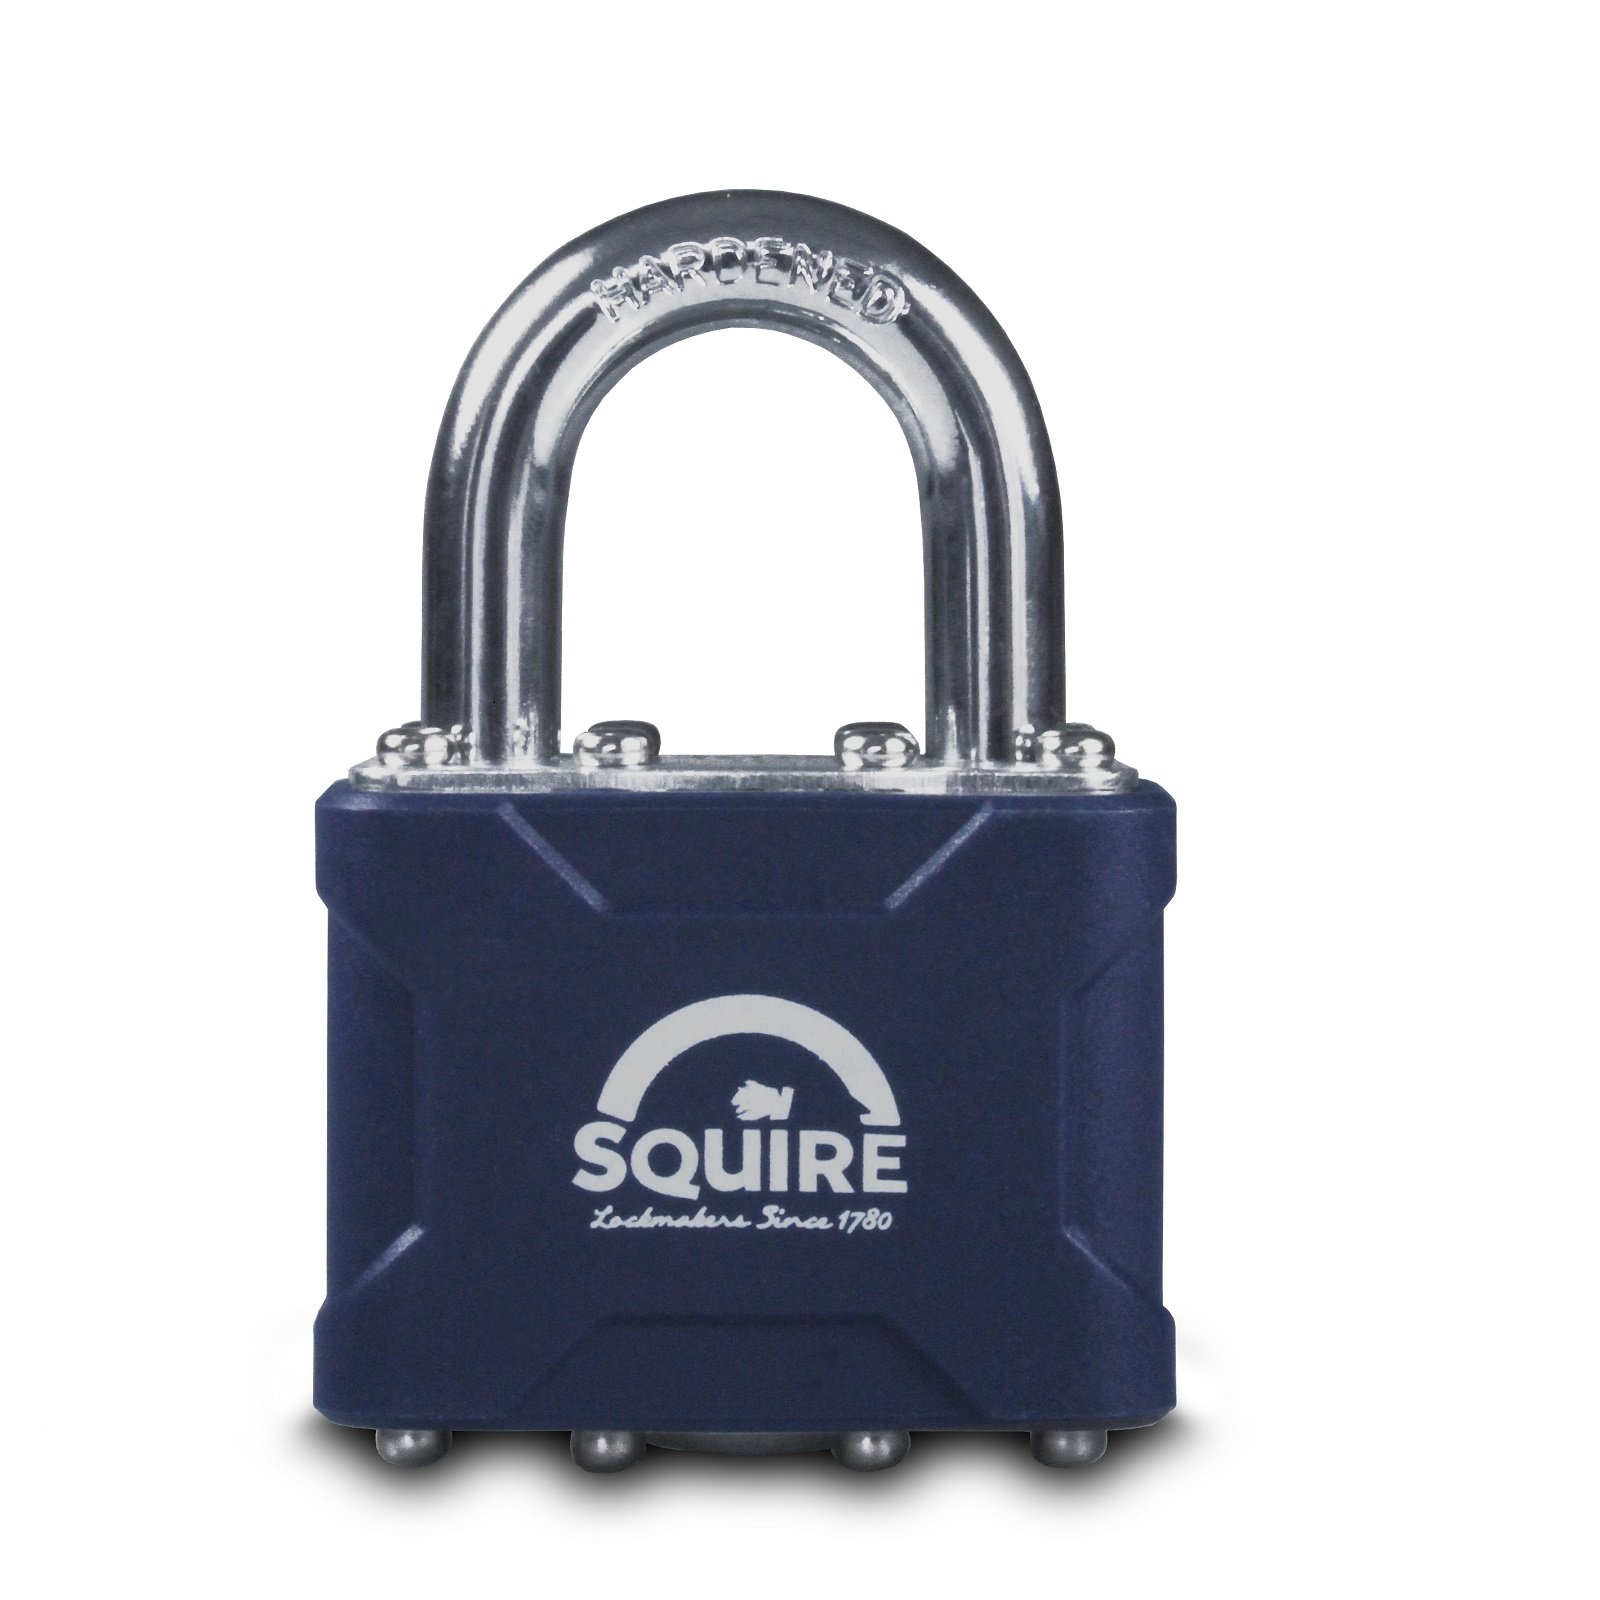 Squire 37 Stronglock Padlock 45mm